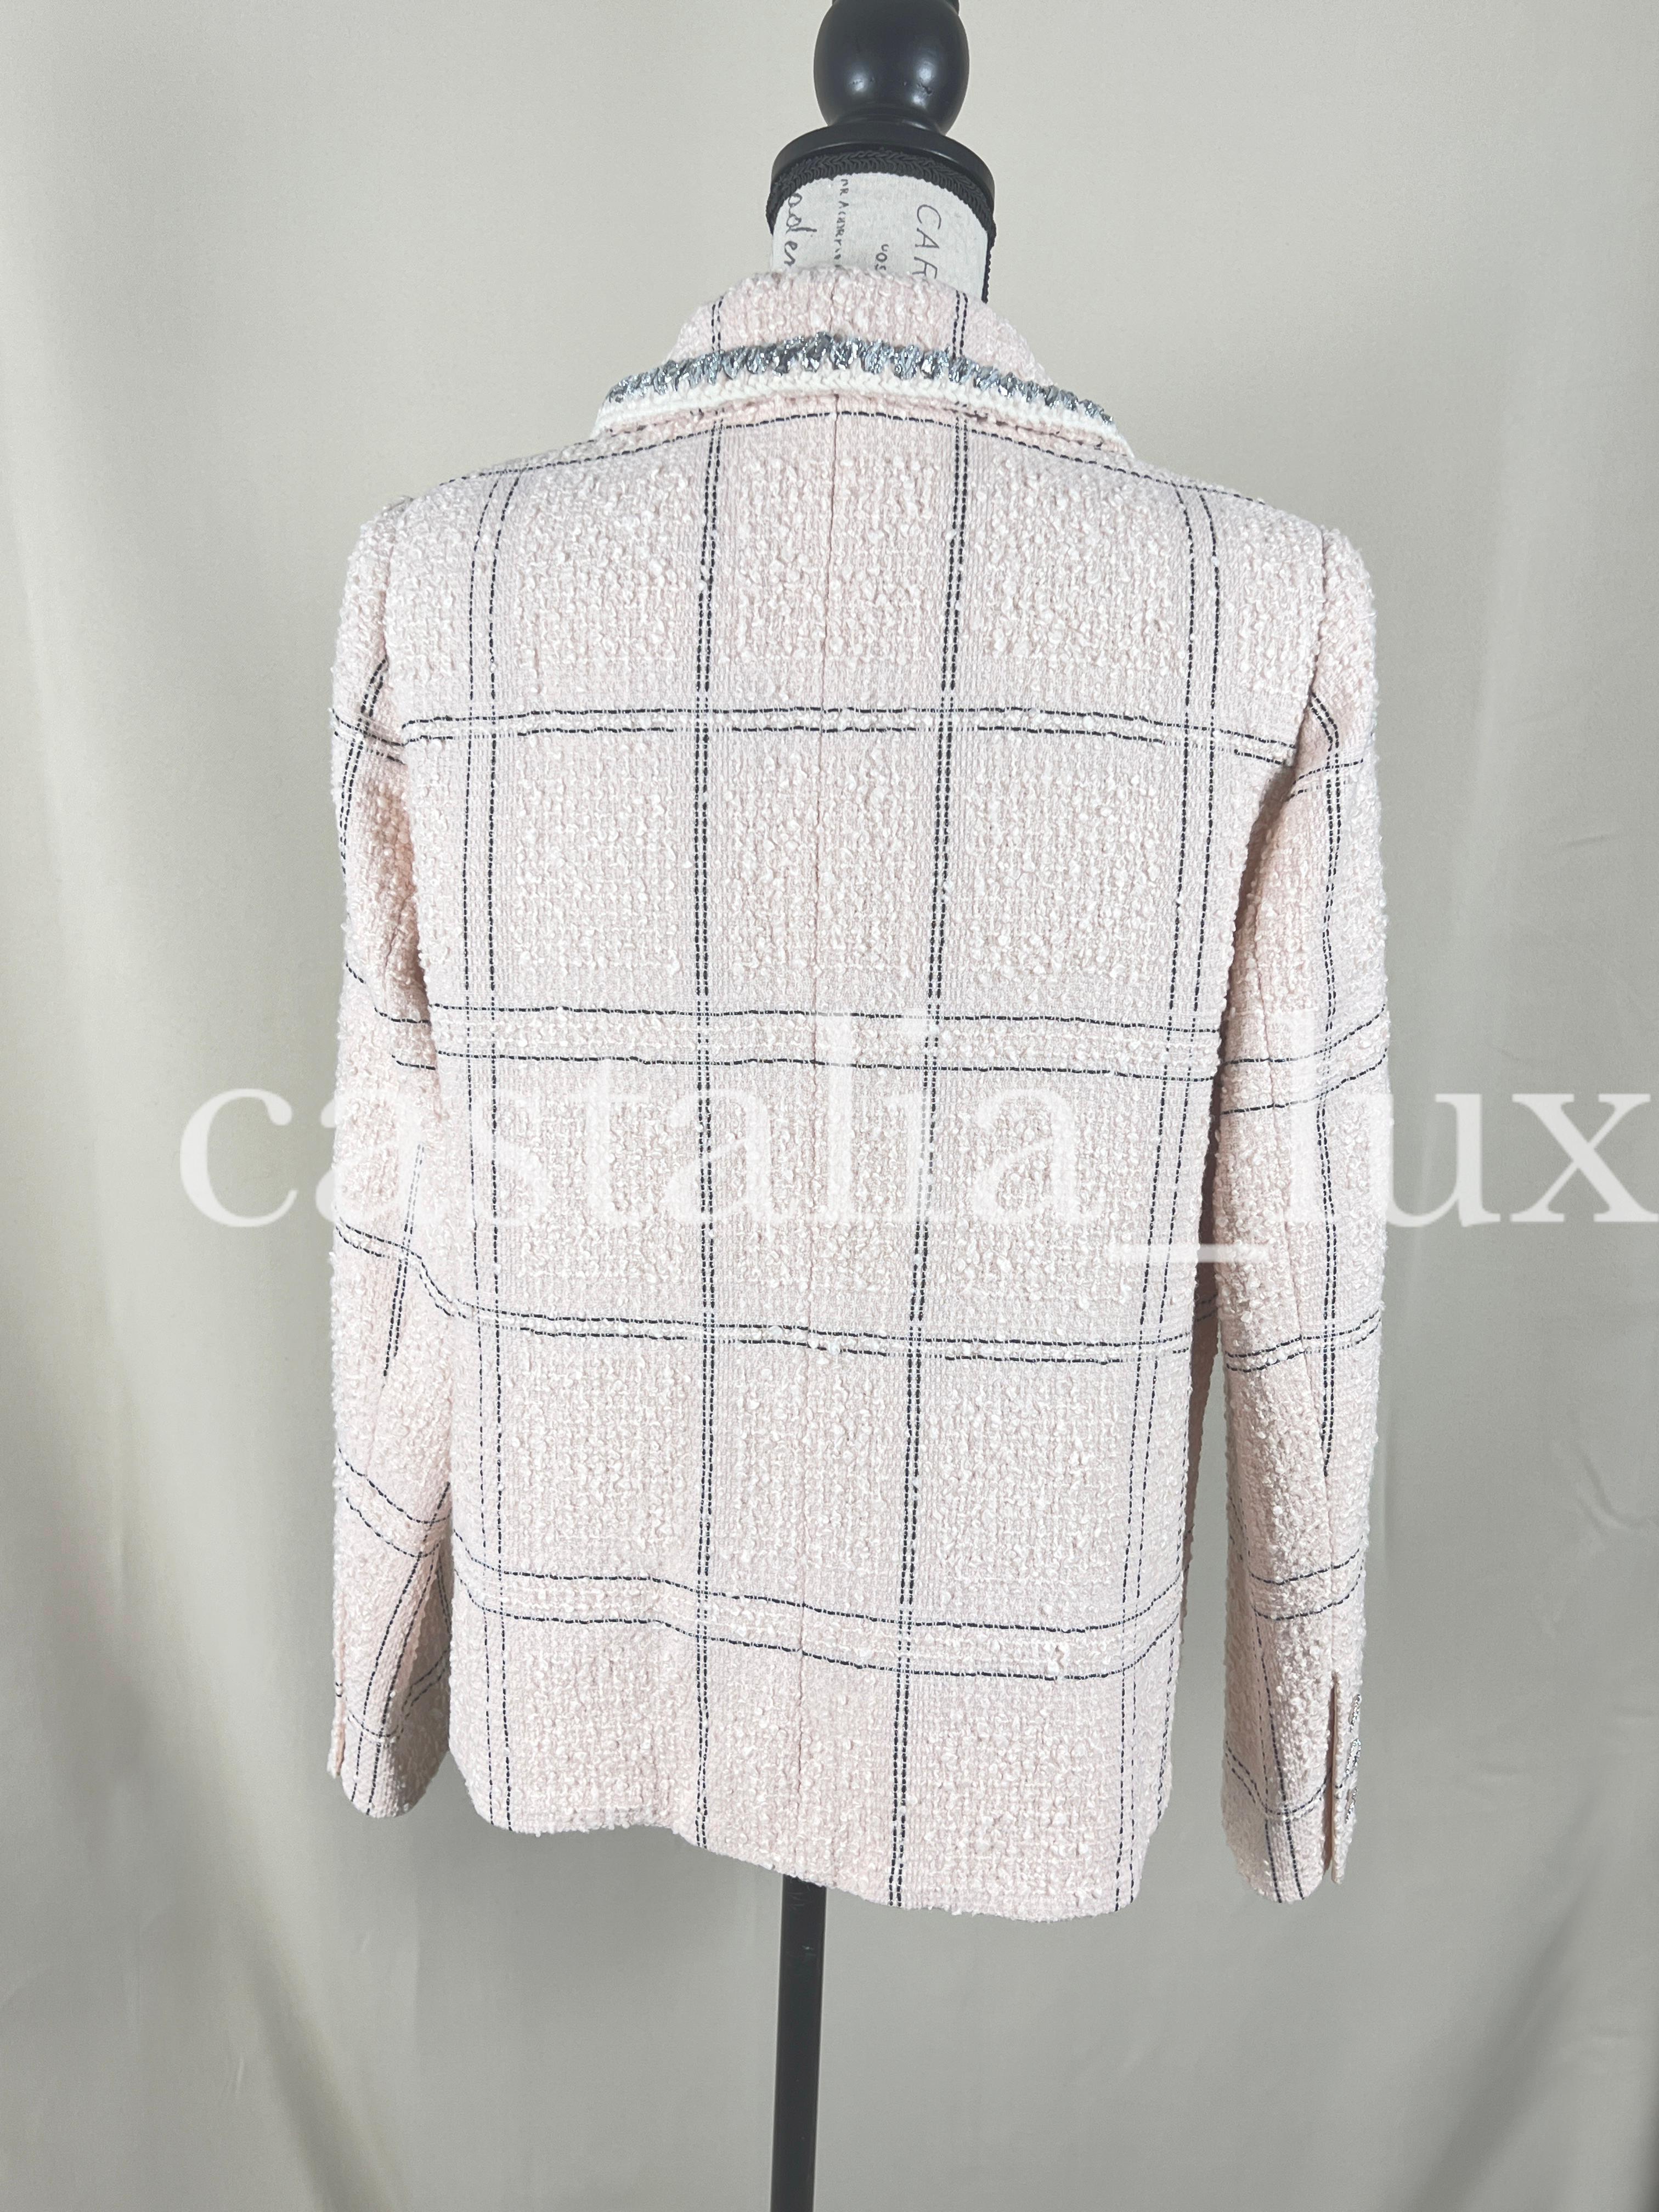 Chanel 2021 Ad Campaign Tweed Jacket For Sale 8